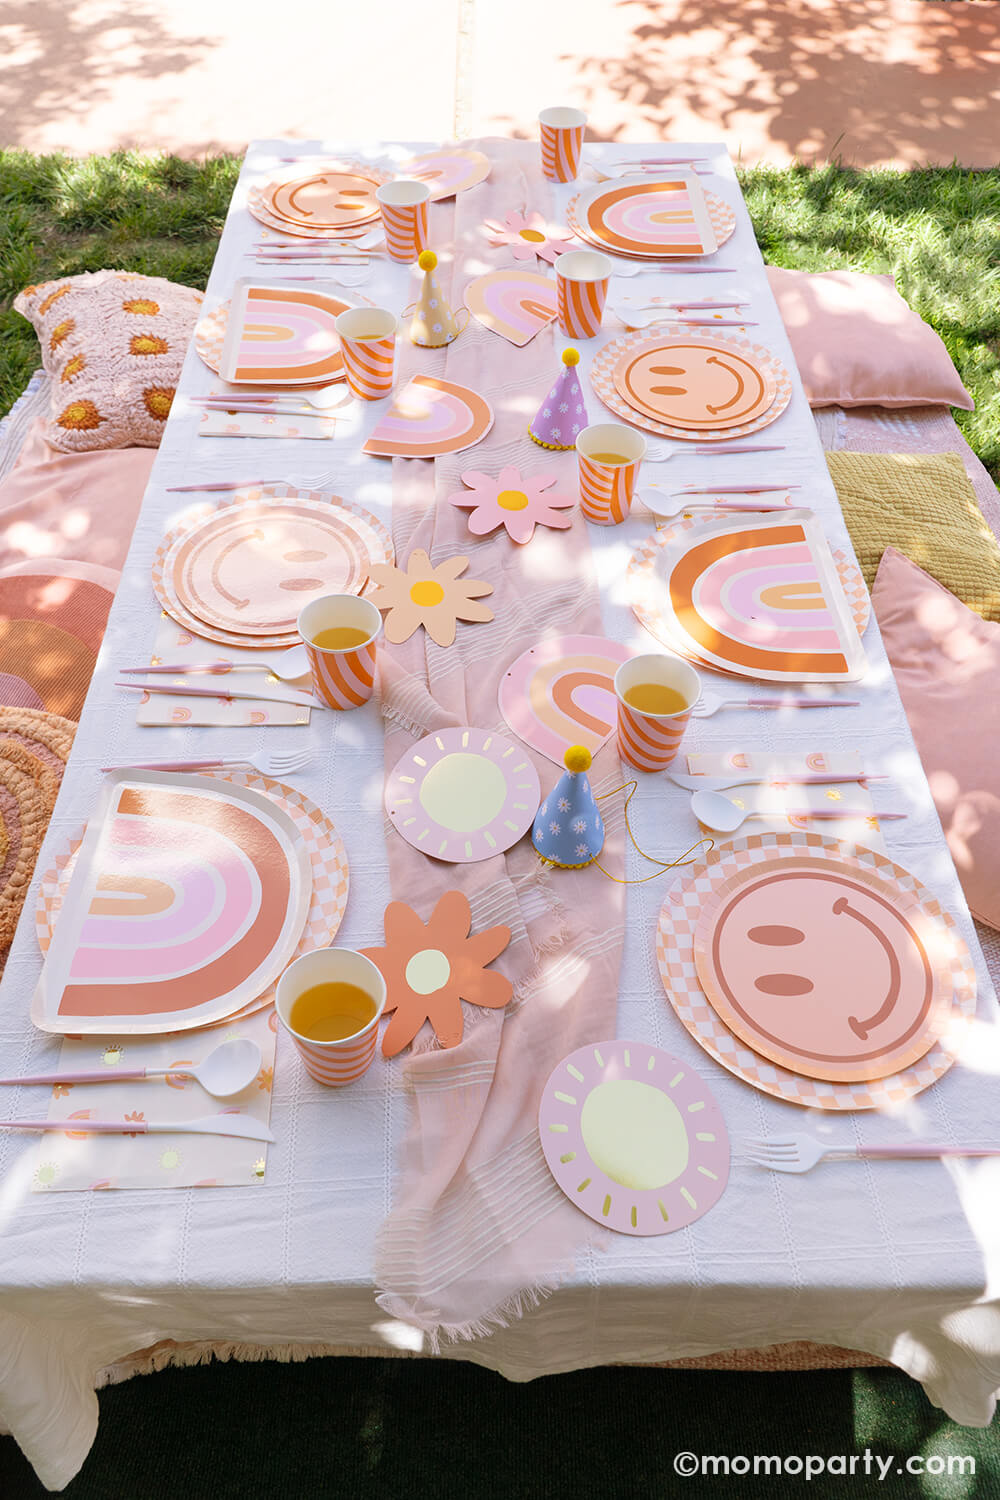 Serves 24 Orange Party Supplies, Disposable Paper Plates, Cups, and Napkins  for Birthday Party, Celebration, Picnic, Summer Event, Baby Shower, Gender